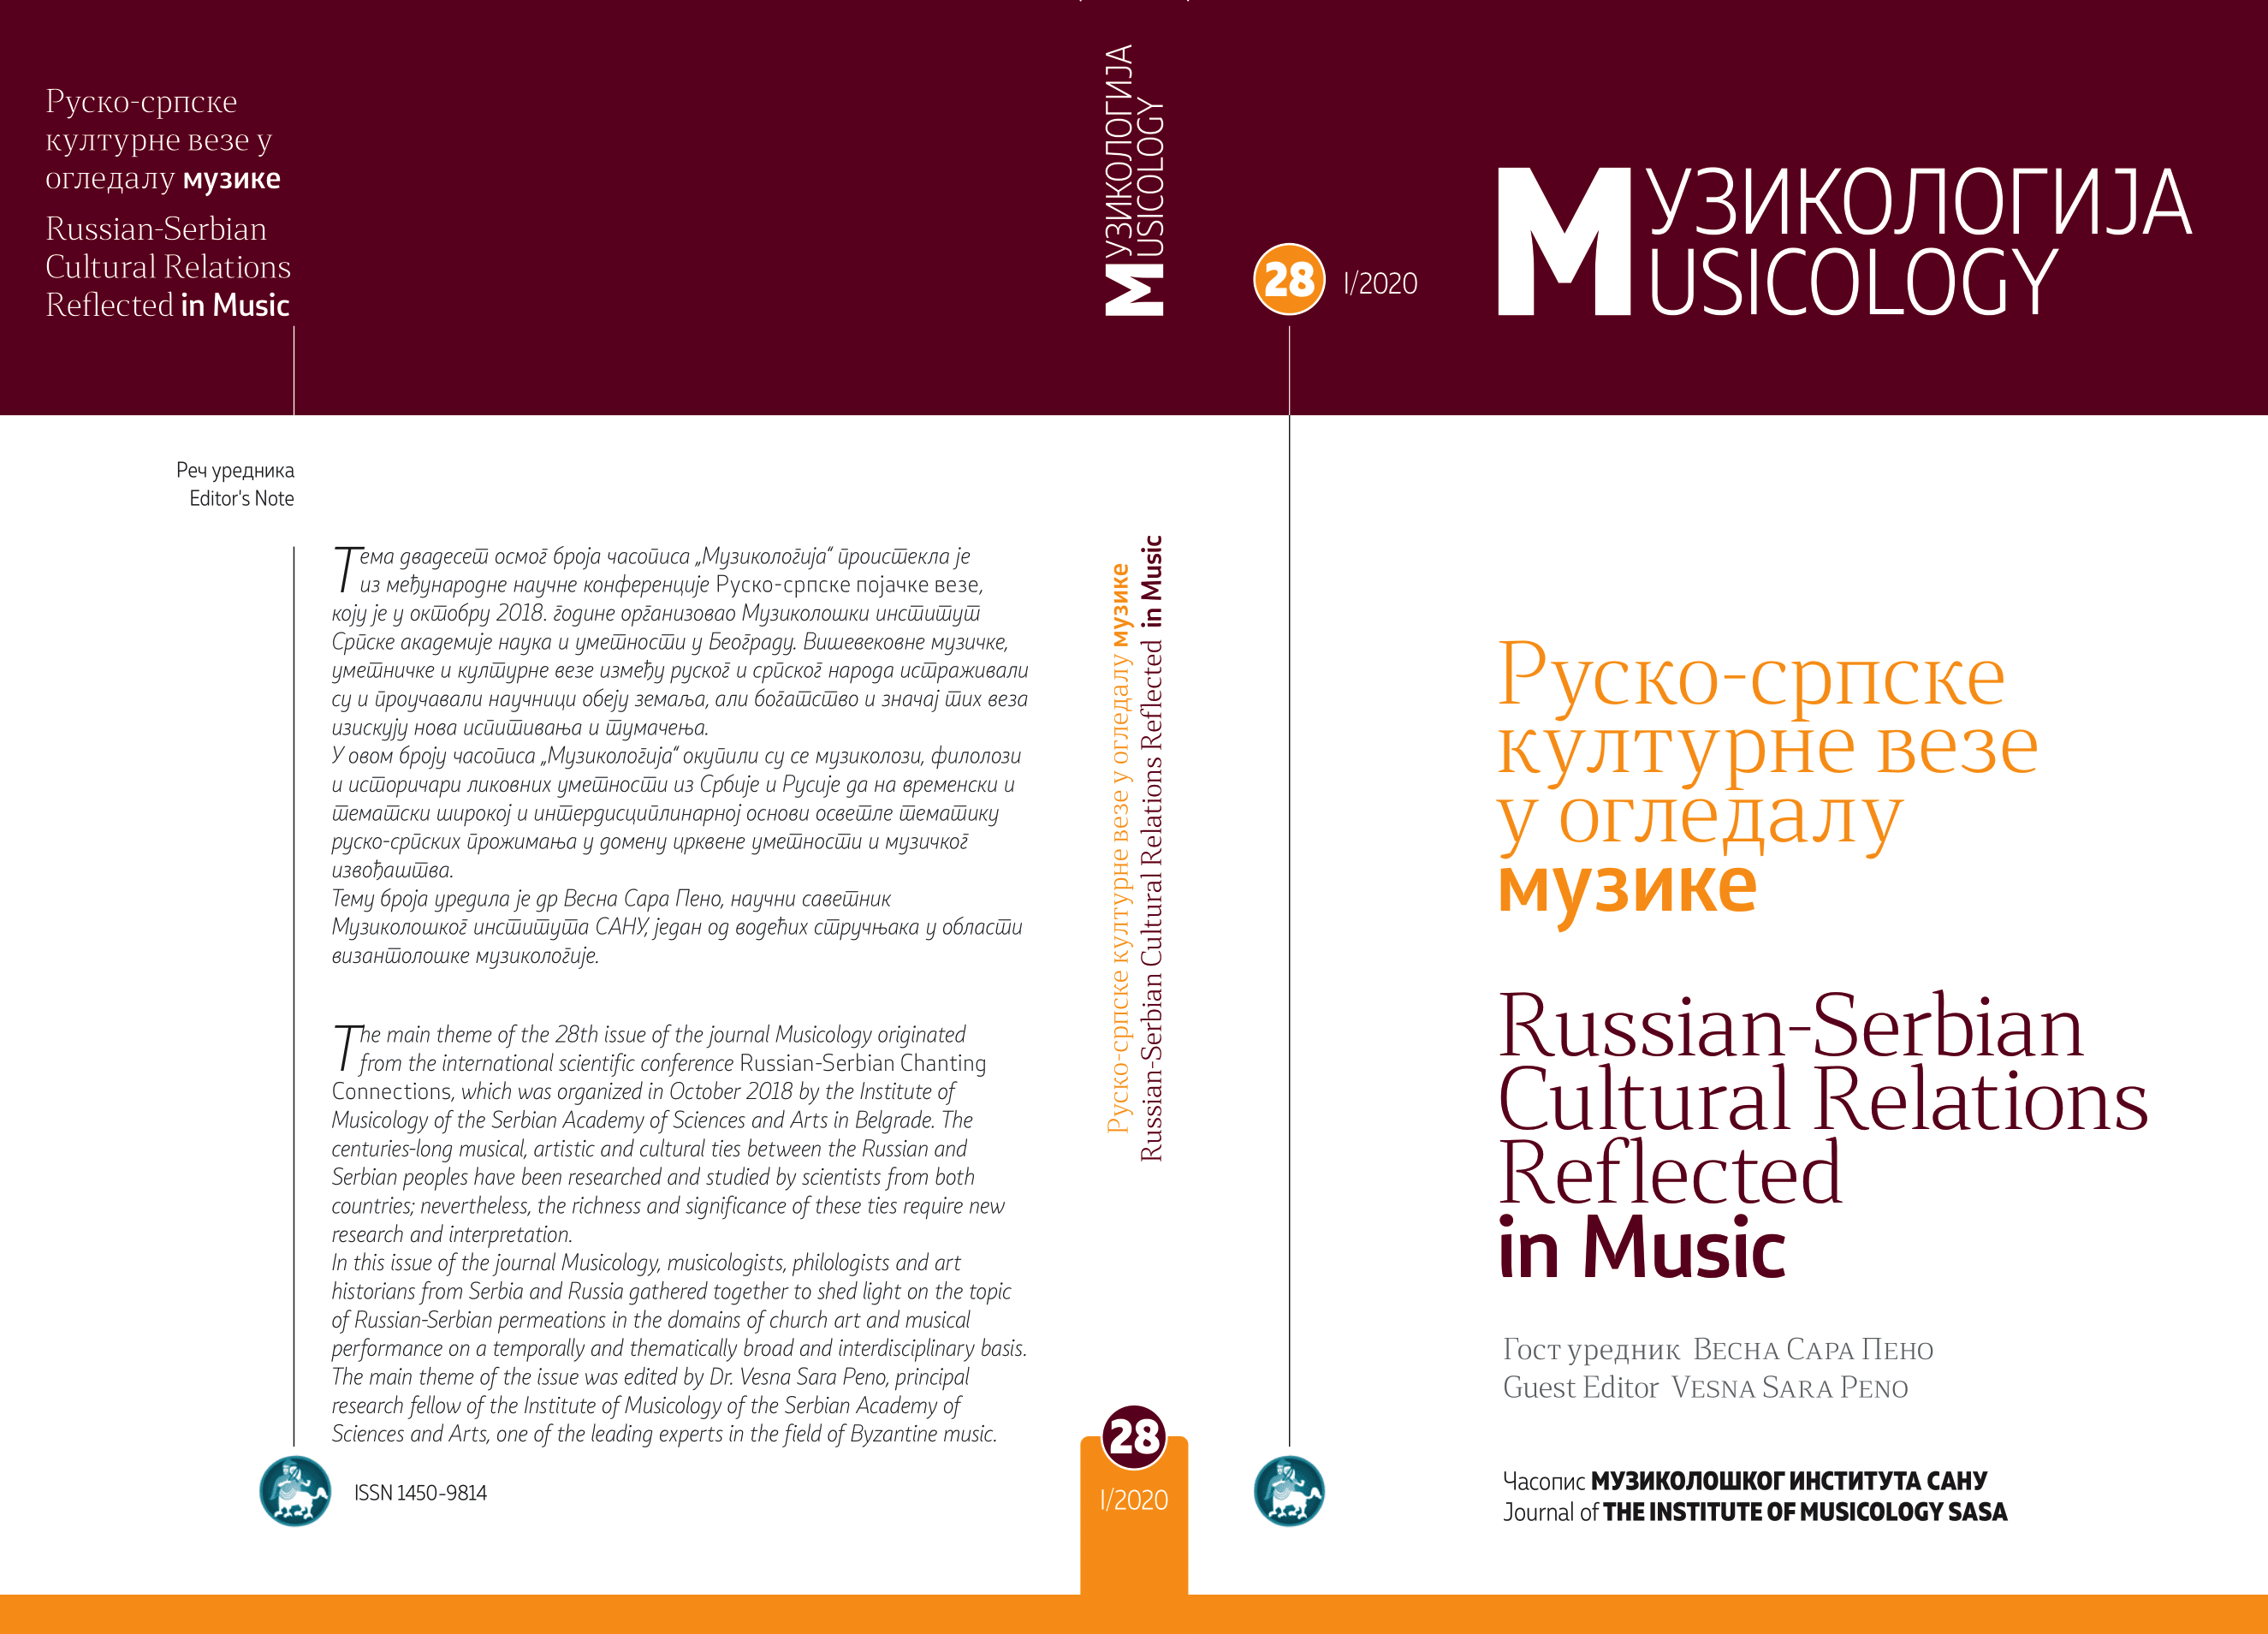 Cover image of the Musicology journal No. 28